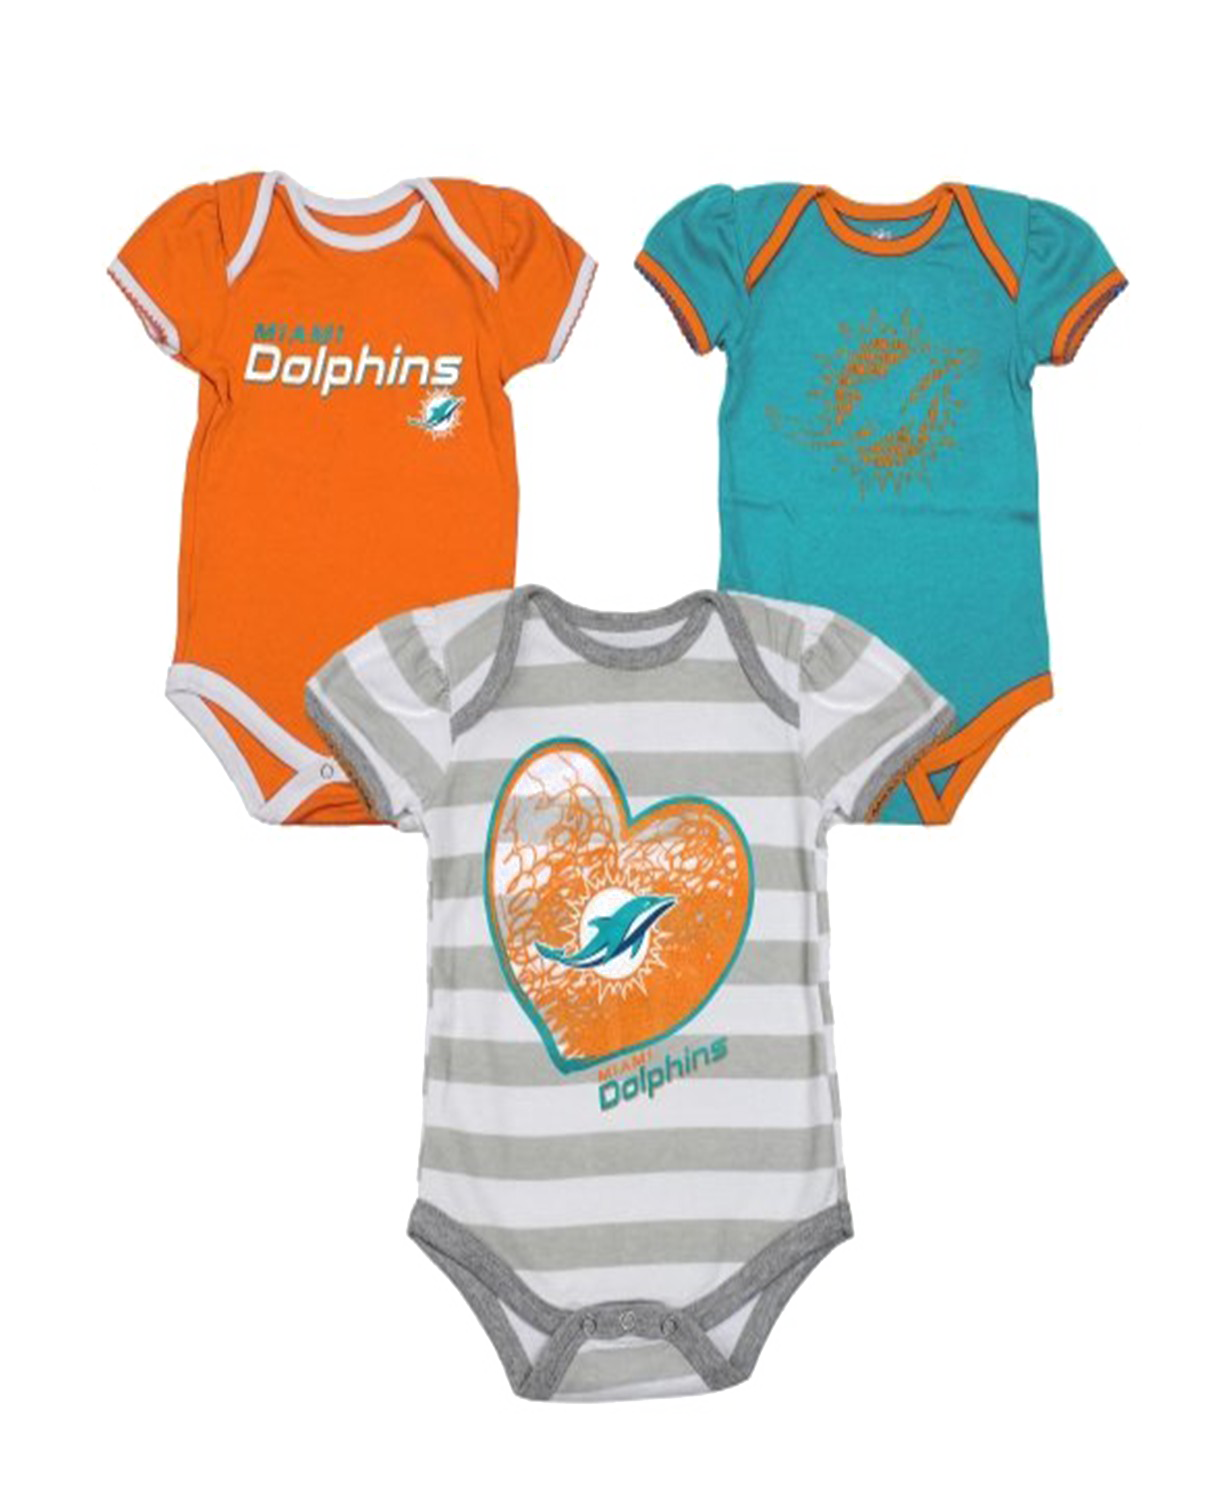 Baby Clothes Free Download Image PNG Image